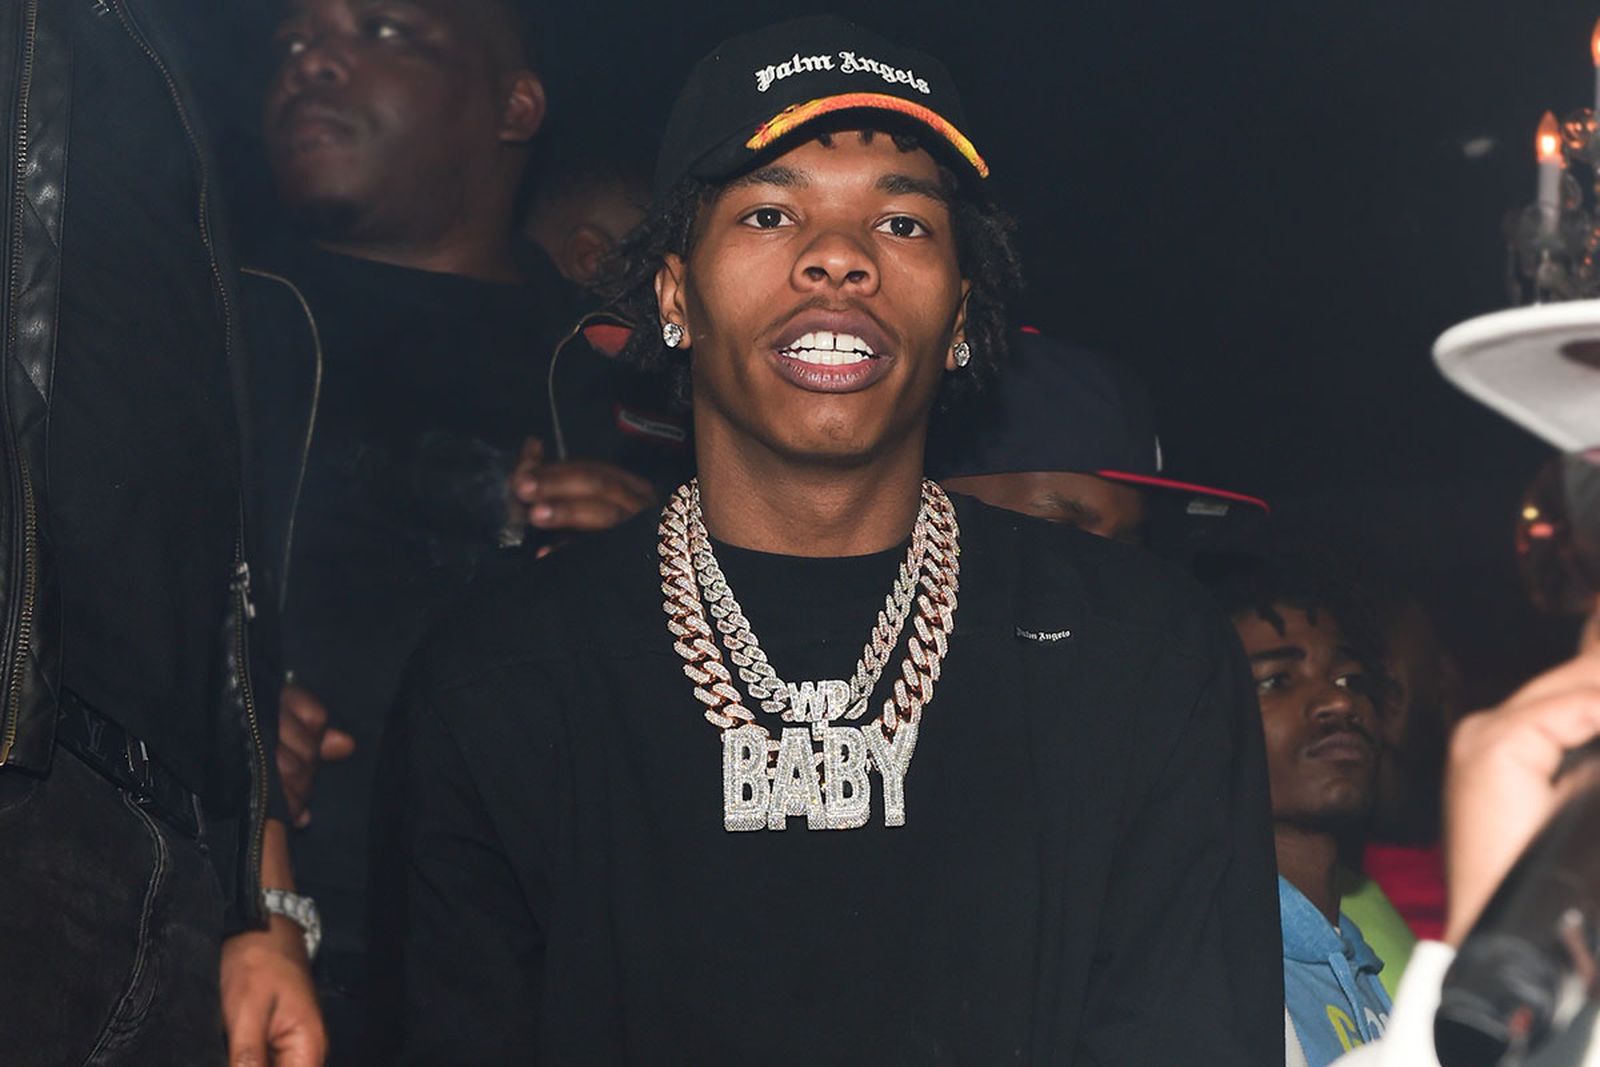 il Baby attends Lil Baby Album Release Party for "My Turn"